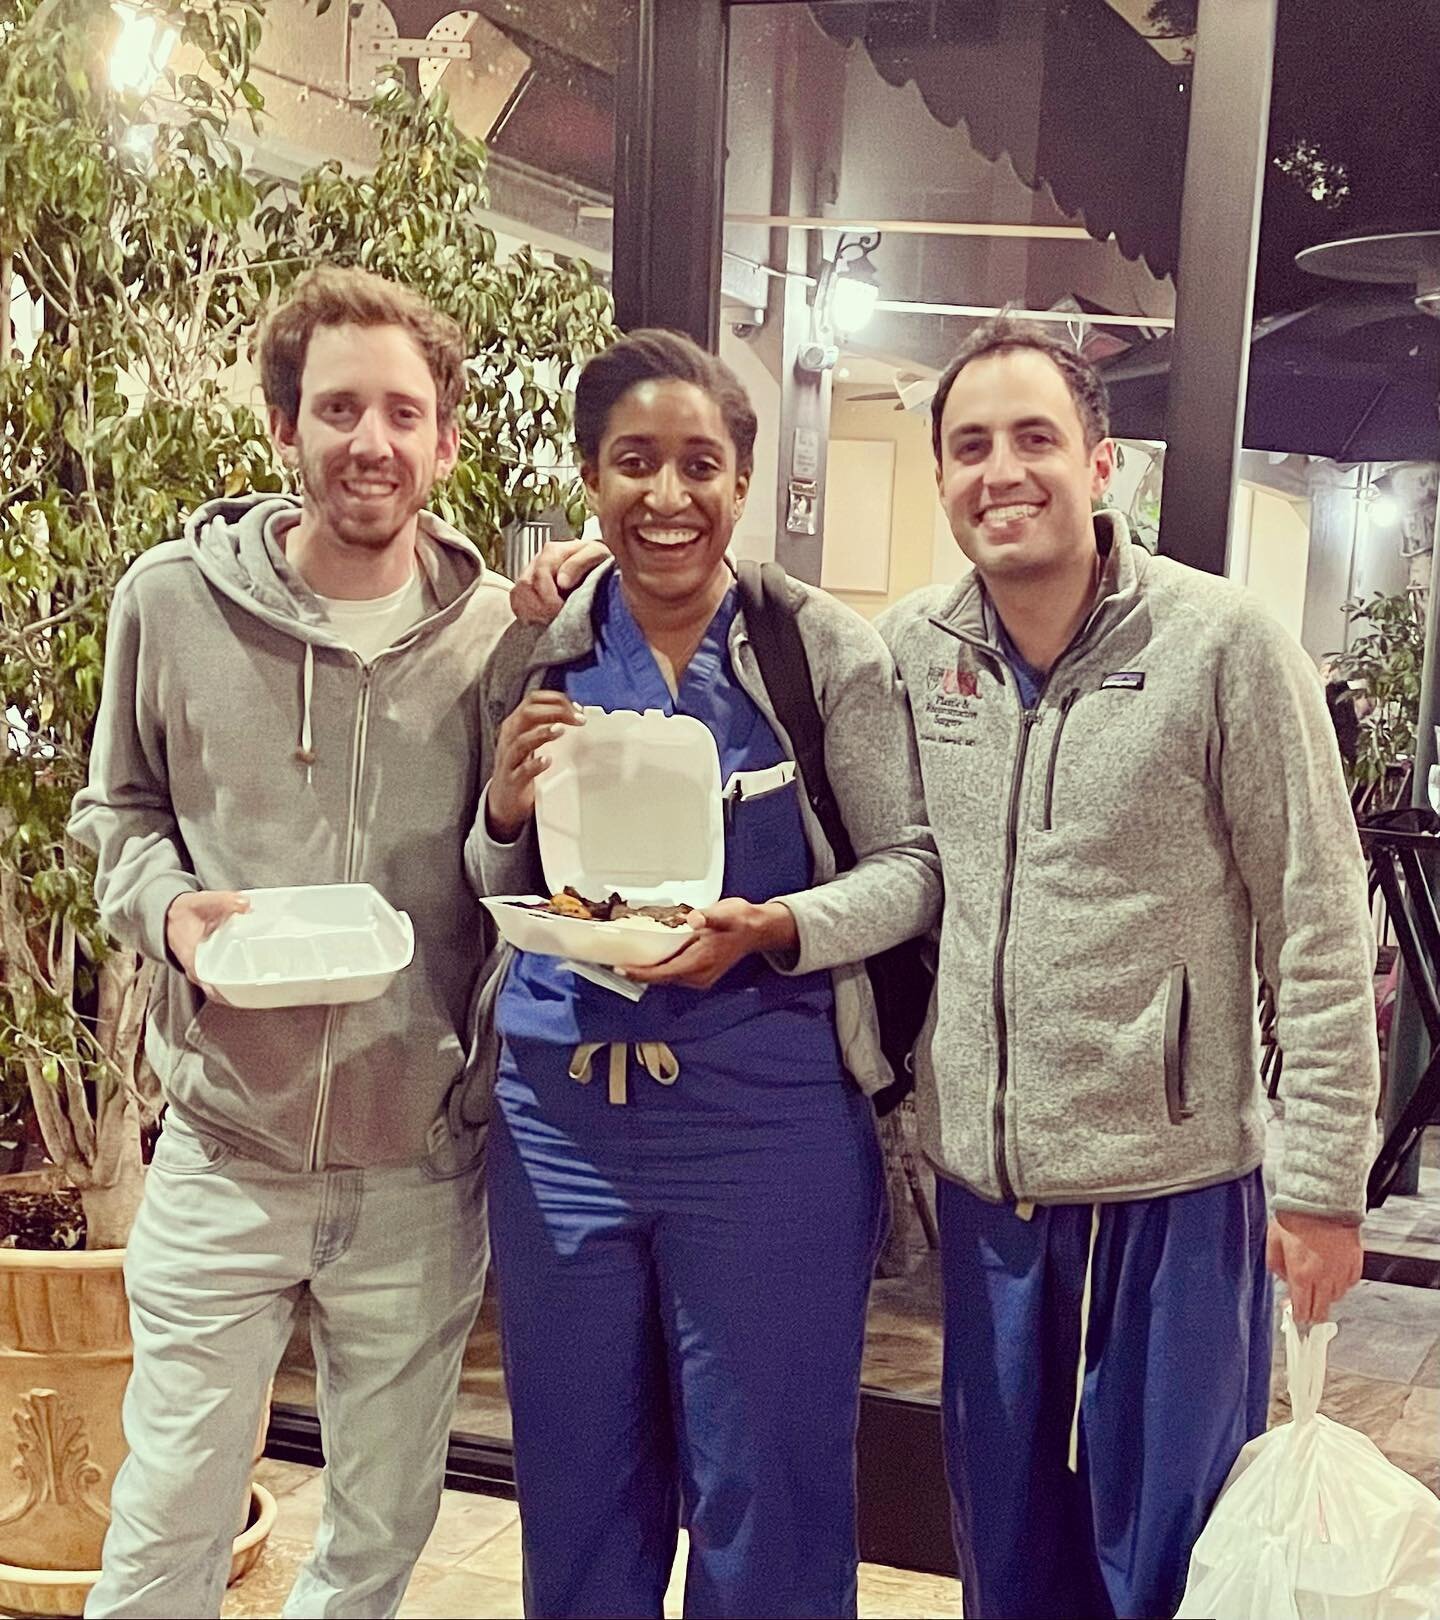 Only thing hotter than the burn unit OR? The kabobs at @raffisplace ! PGY5 Naikhoba Munabi and PGY2&rsquo;s Michael Cooper and Shervin Etemad enjoyed a delicious dinner together after a fun day of burn reconstruction. We love grabbing team dinners an